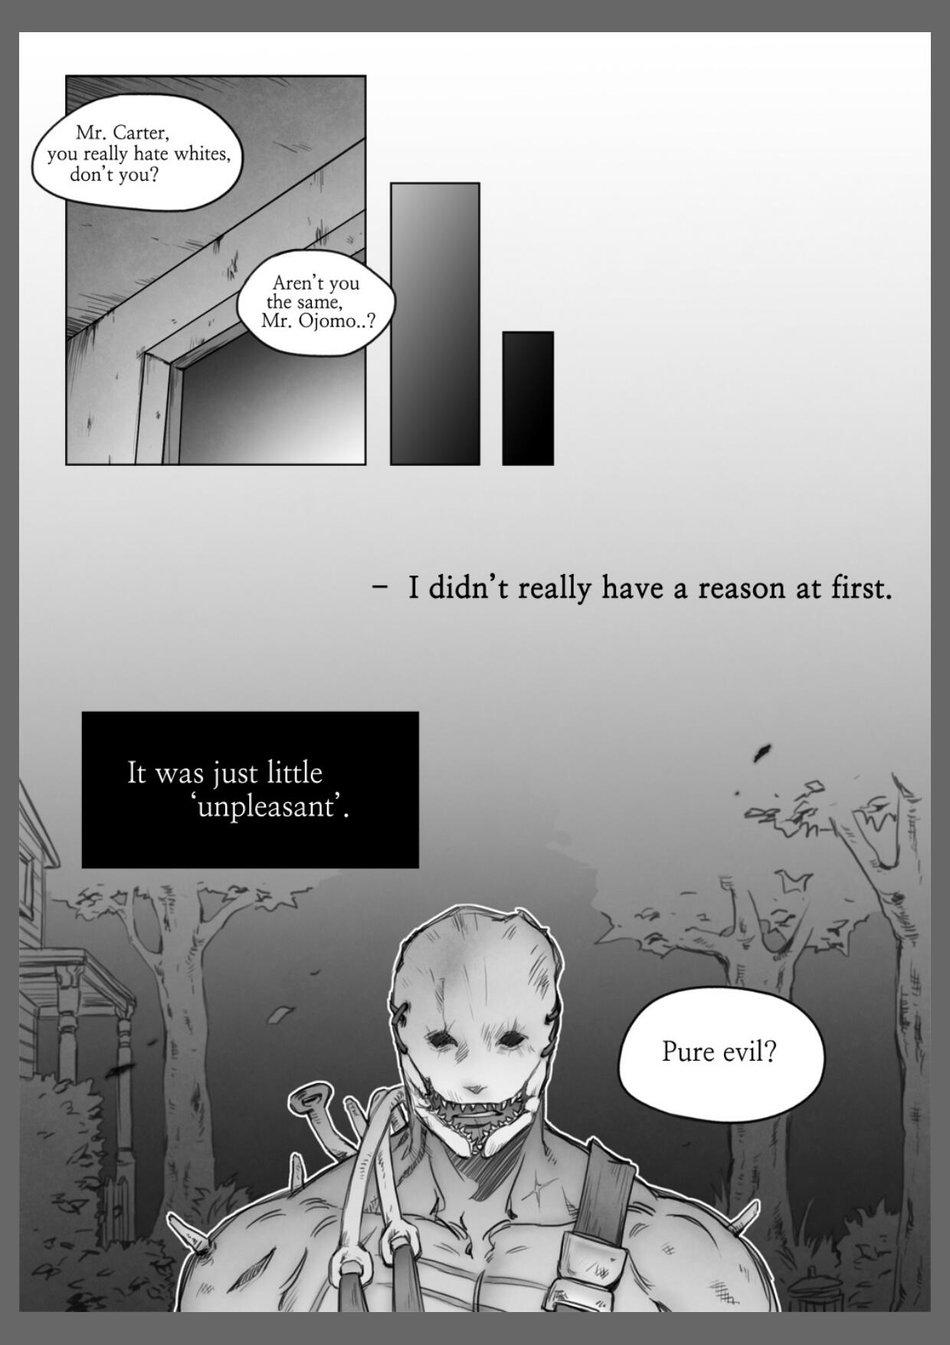 Nasty Bring Me to Death - Dead by daylight Amature Allure - Page 9